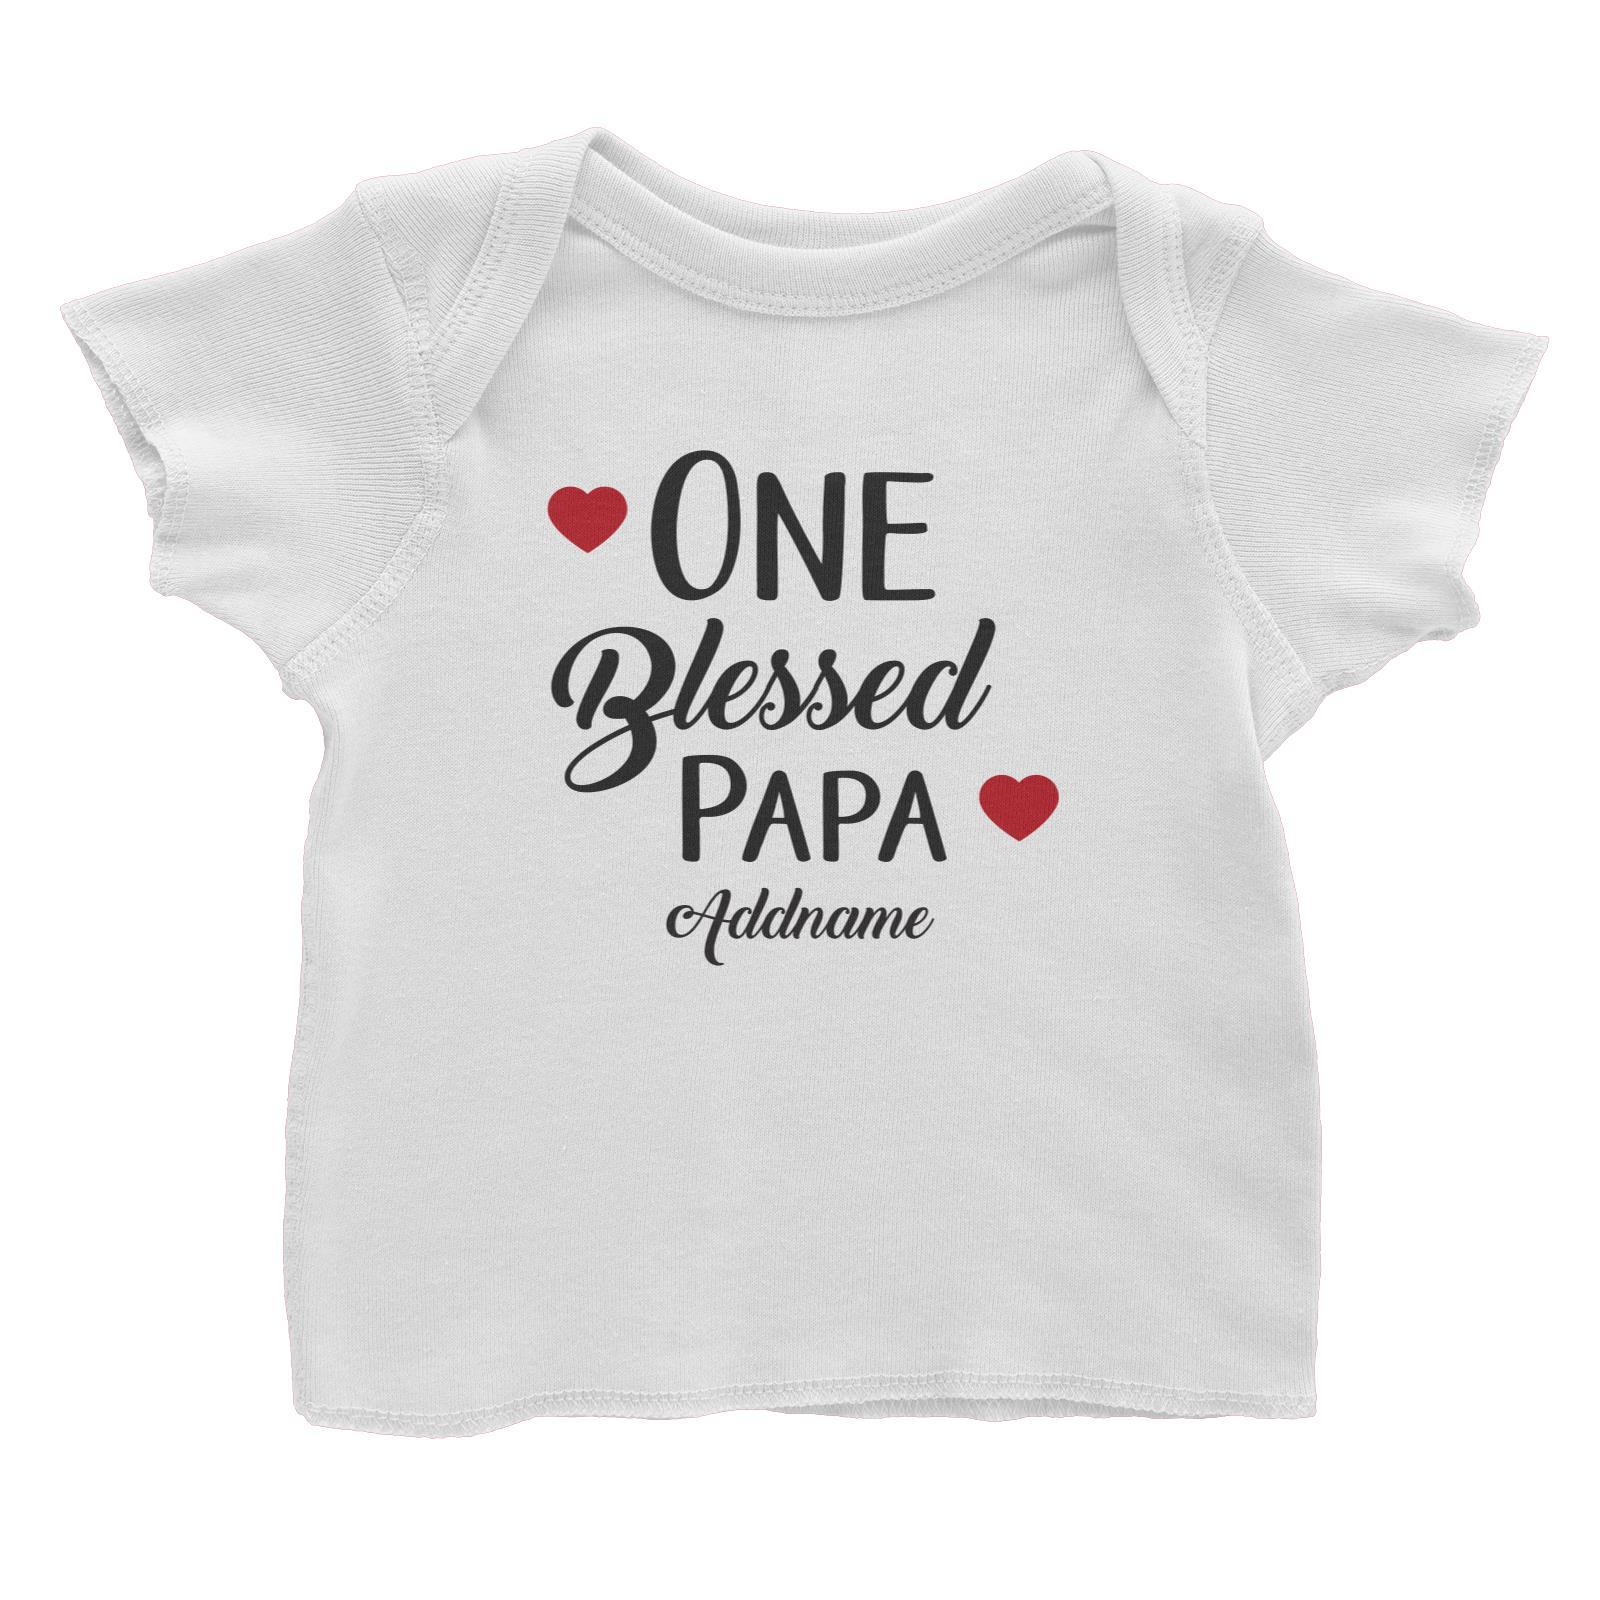 Christian Series One Blessed Papa Addname Baby T-Shirt